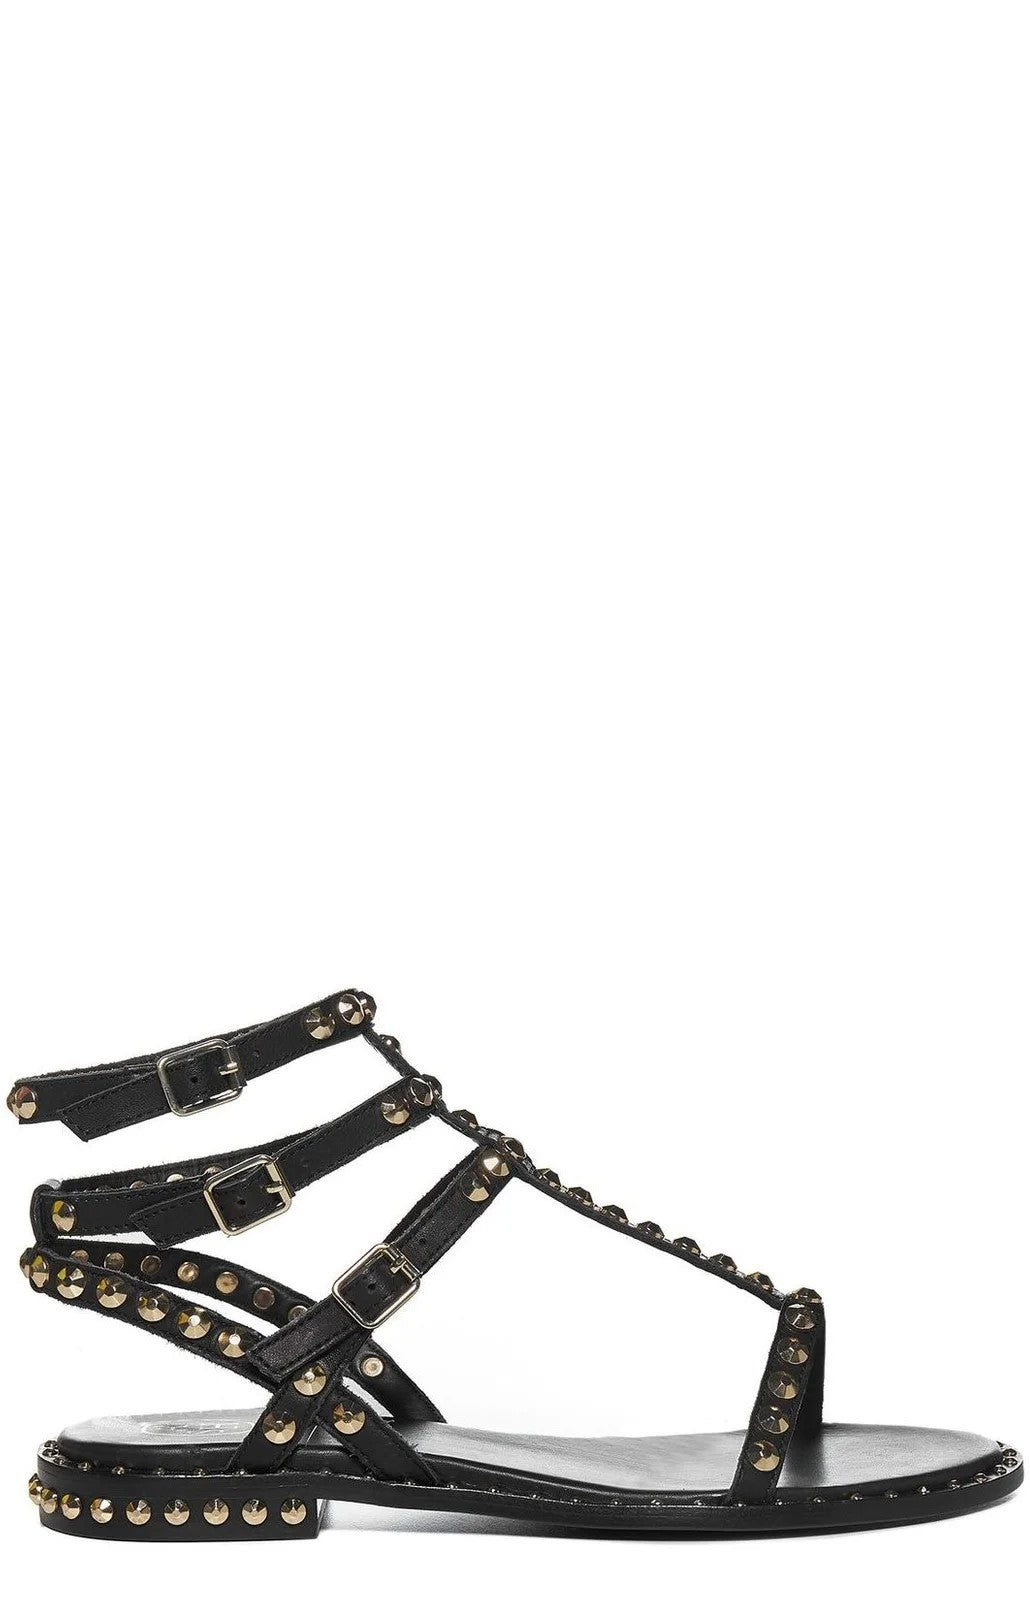 Play Sandal In Black With Gold Studs